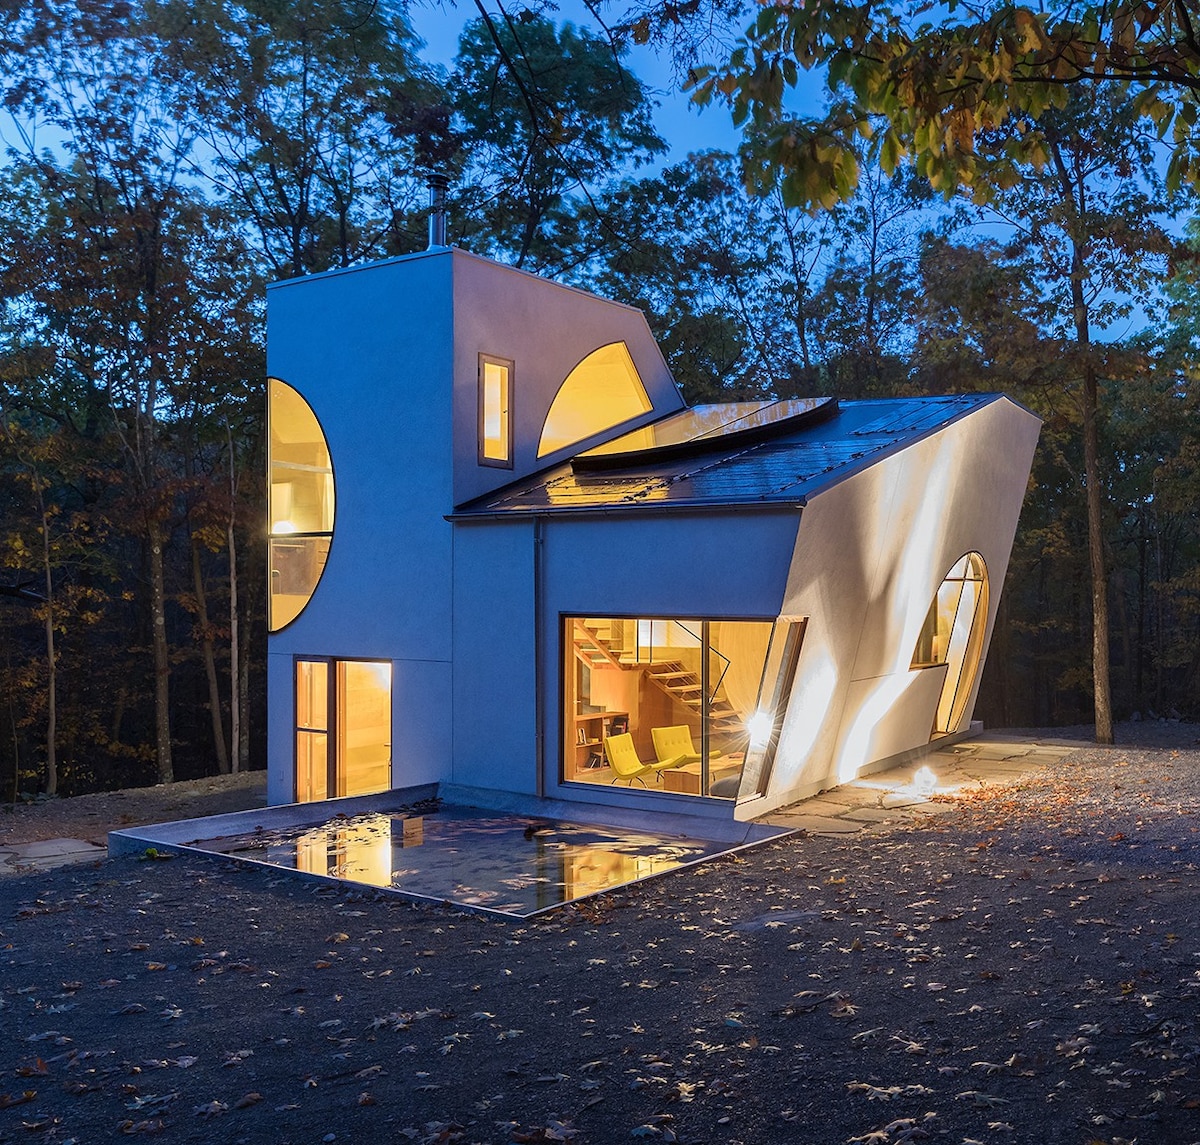 A white, modern home designed by Steven Holl, is captured at dusk and lit warmly from within.